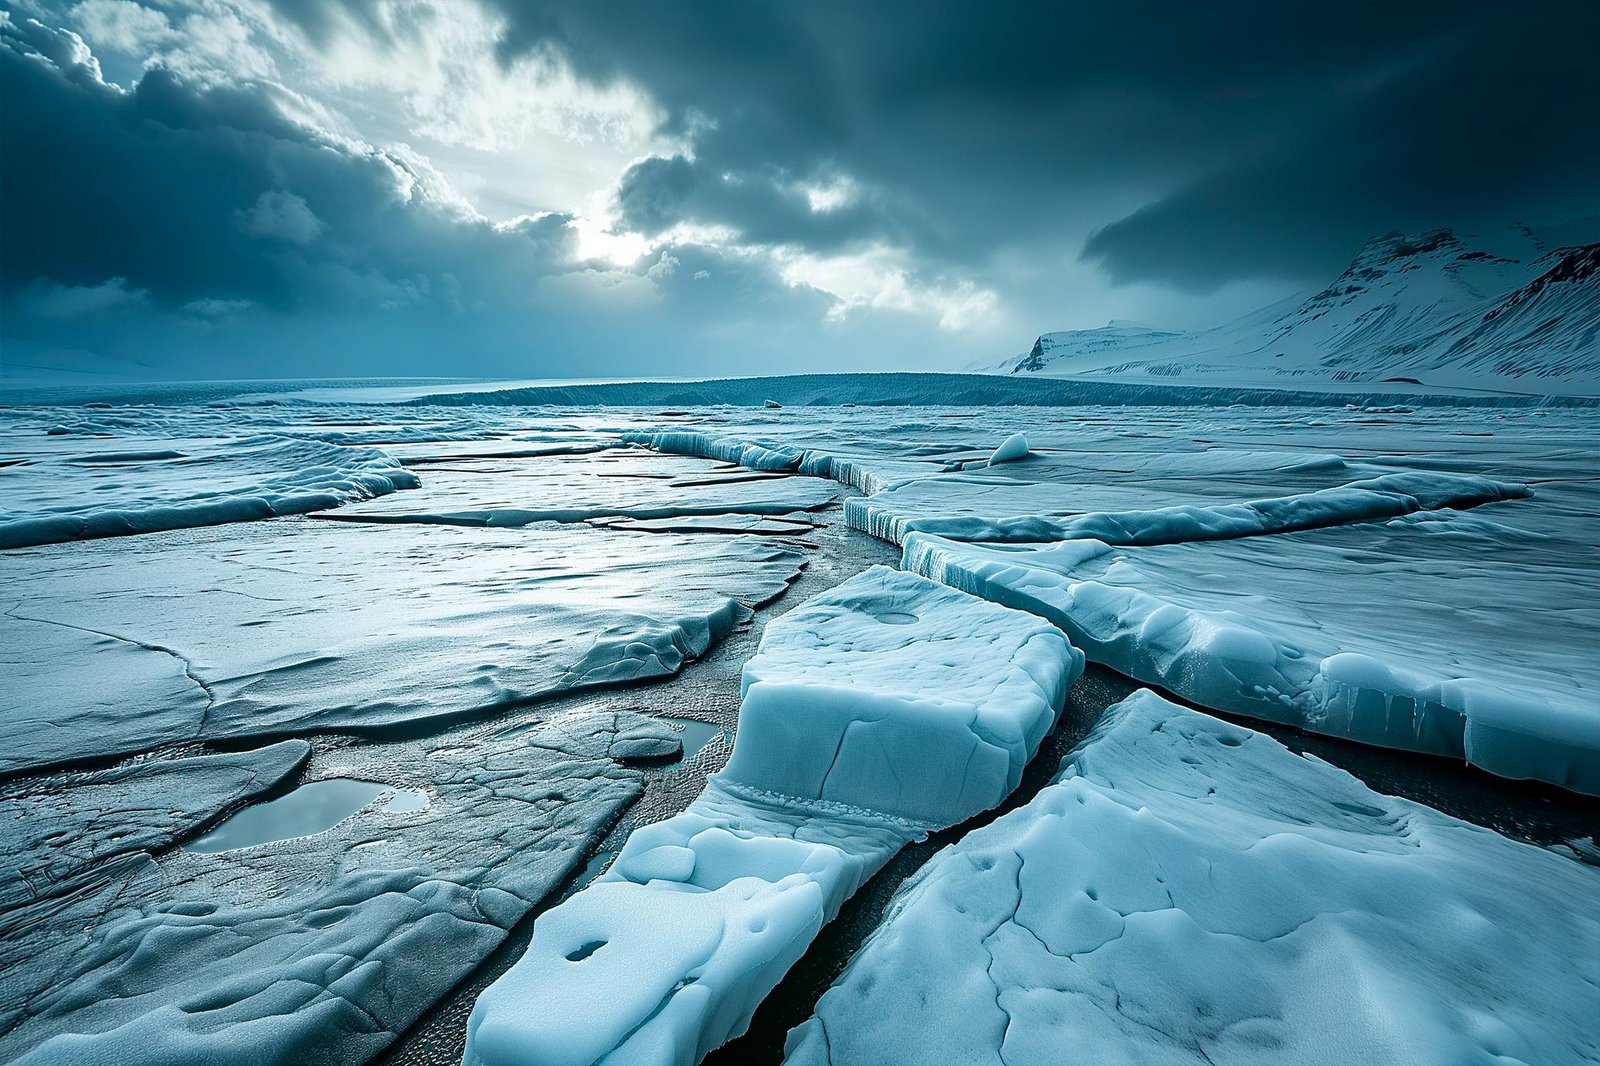 A possible resolution to the melting of ice sheets due to climate change has been revealed through recent research.